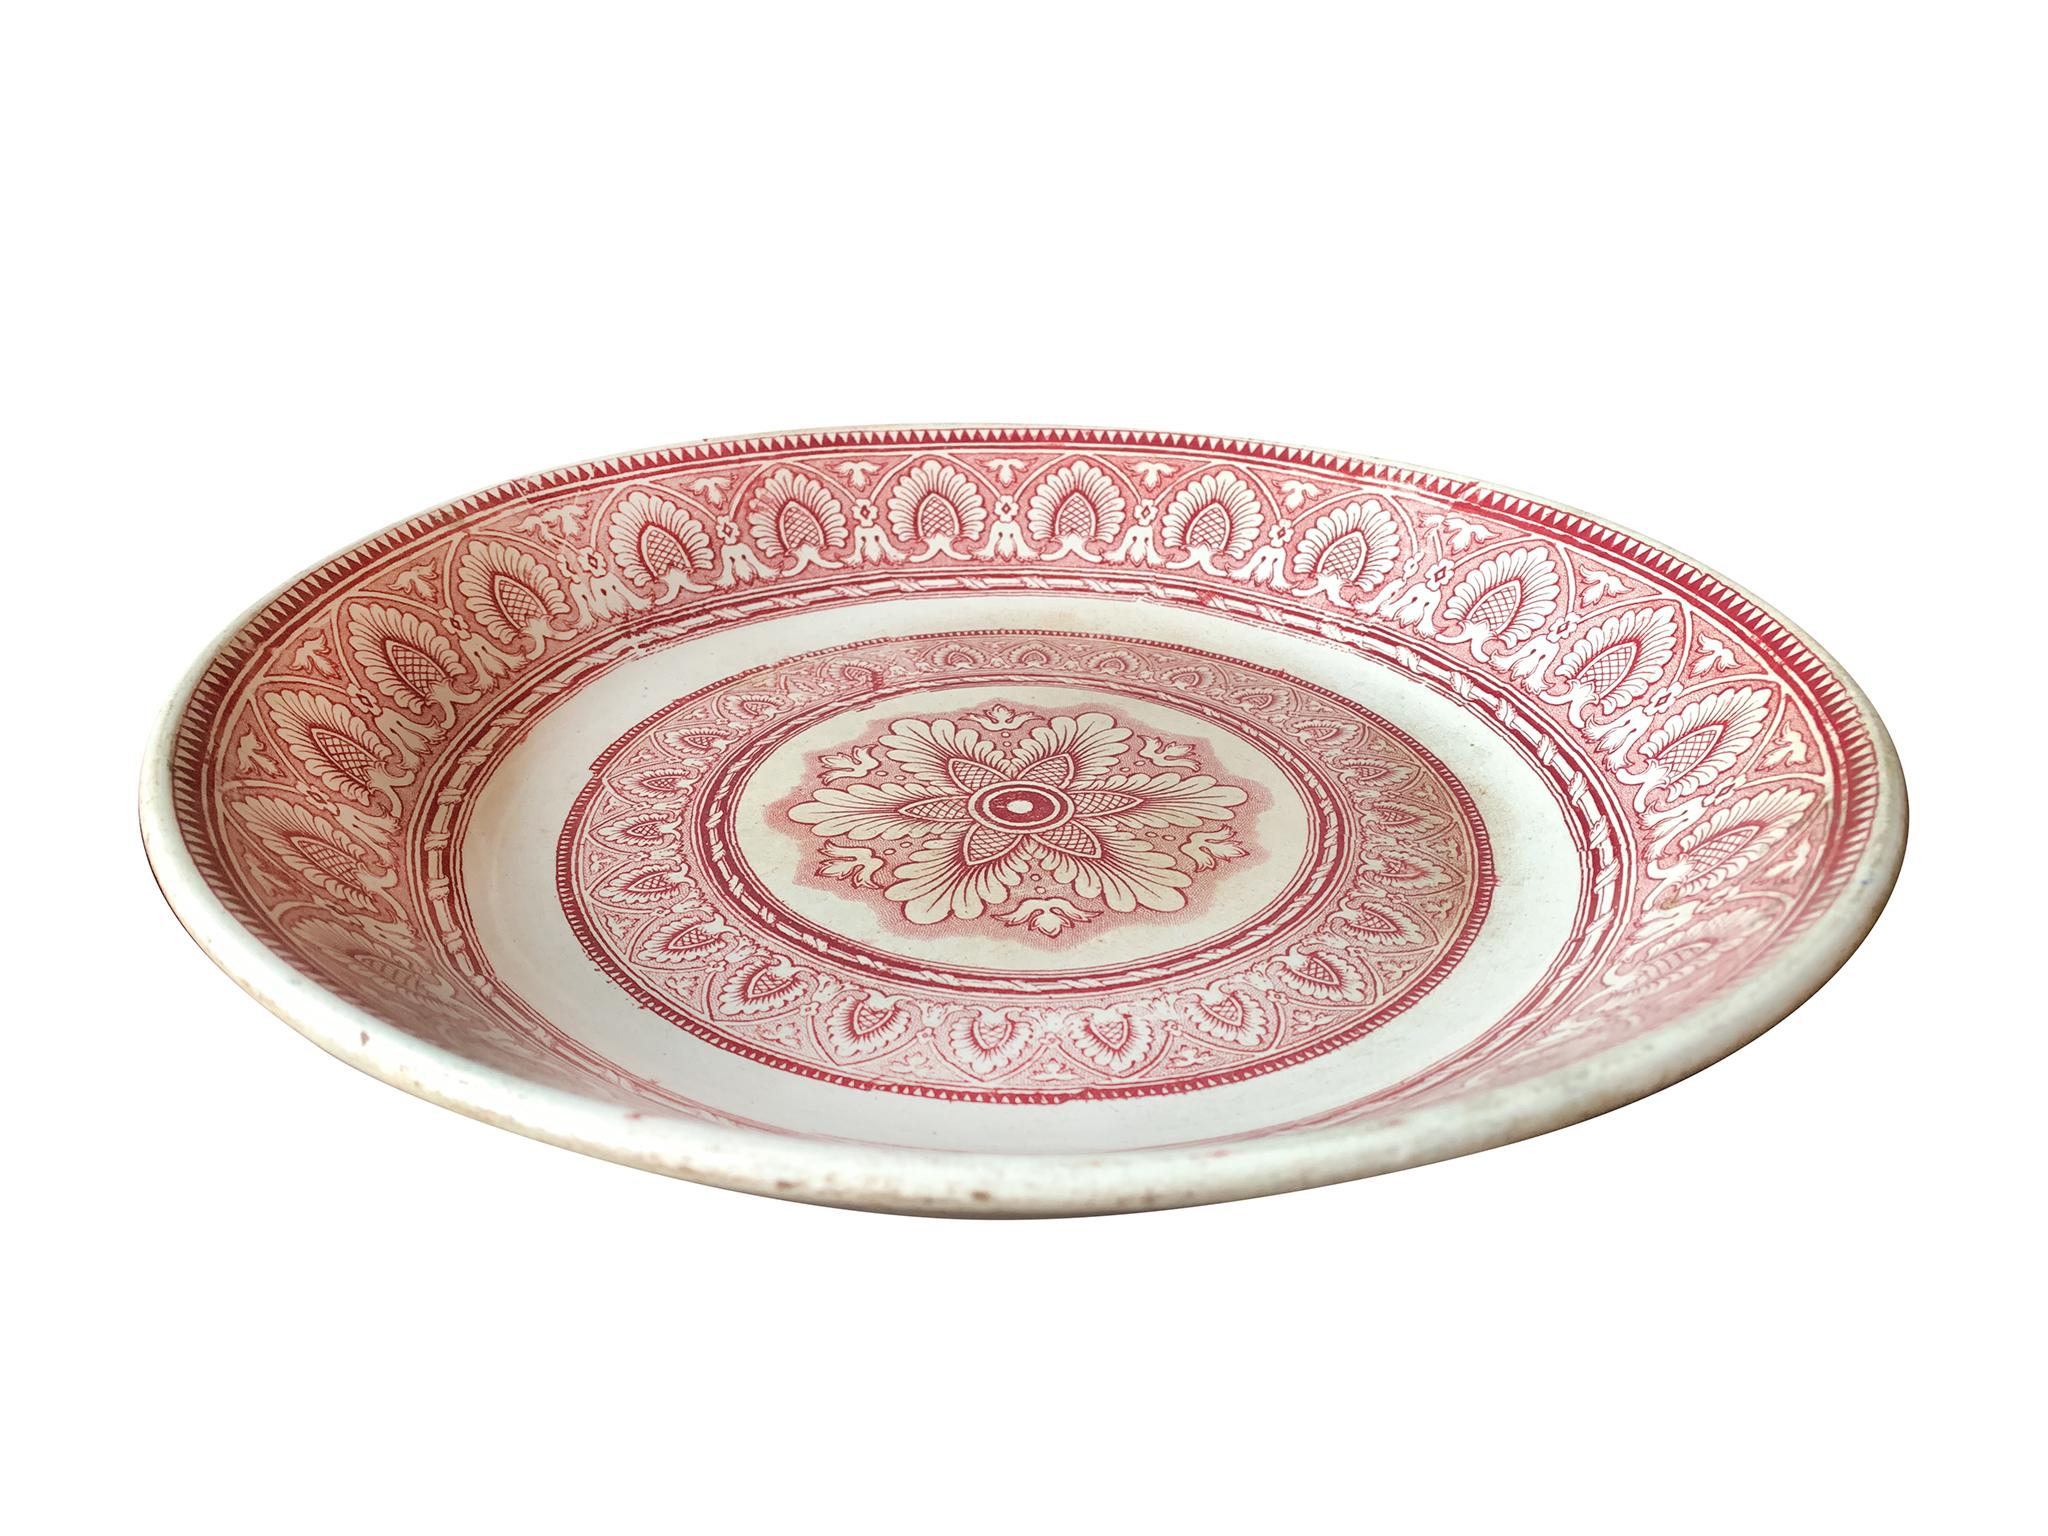 Dutch transferware ceramic bowl, crafted in the 19th century by Petrus Regout & Co. in Maastricht. It features a rich floral design in a maroon tone.

Dimensions:
14.25 in. diameter
2.5 in. height

Condition notes:
In good condition with wear